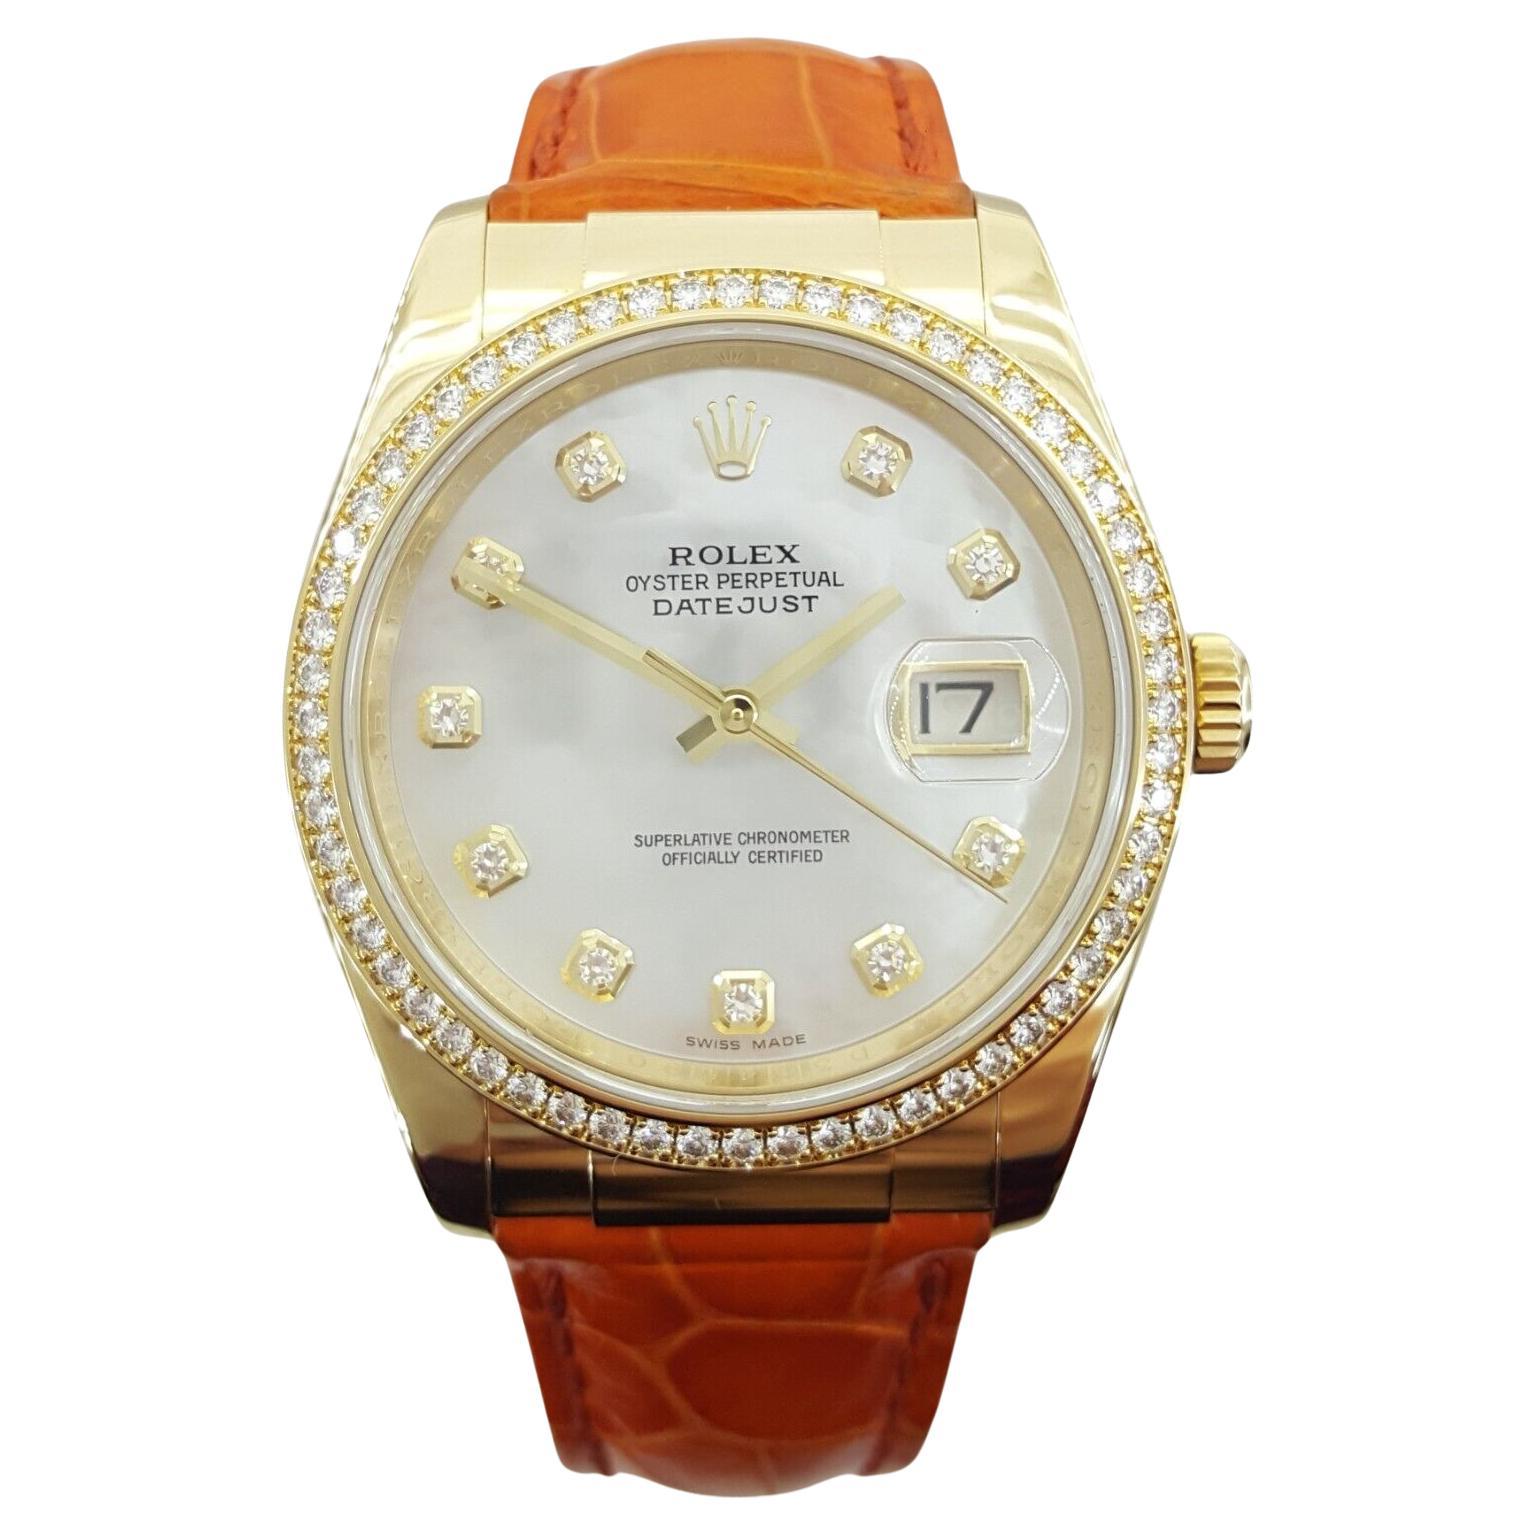 You are purchasing an Authentic Rolex Lady DateJust 116188, a 36mm timepiece crafted in 18K Yellow Gold, featuring a Factory Mother of Pearl Diamond Dial and a Factory Diamond Bezel.

This watch is a true marvel, equipped with a screw-down crown and